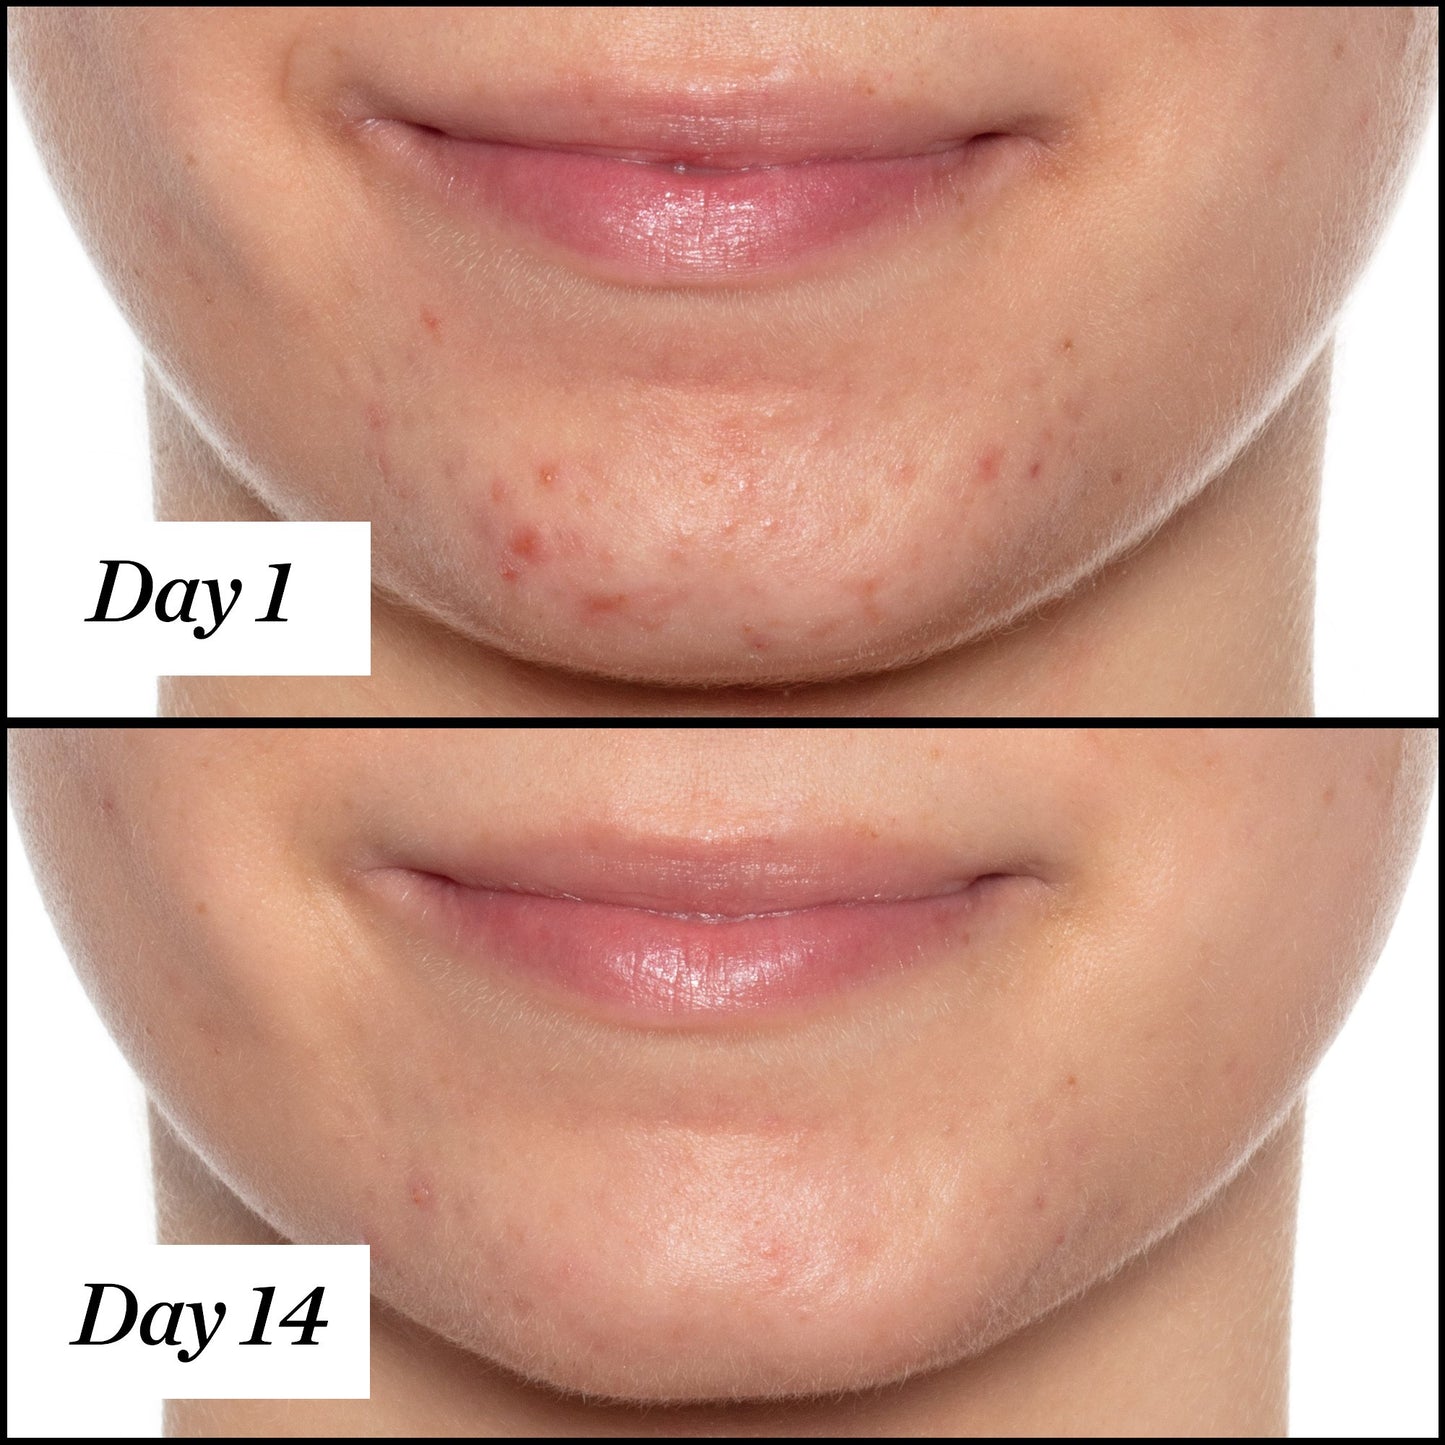 U.F.O. product usage, before and after results from day 1 to day 14. Clear and visible results; reduced redness and blemishes.